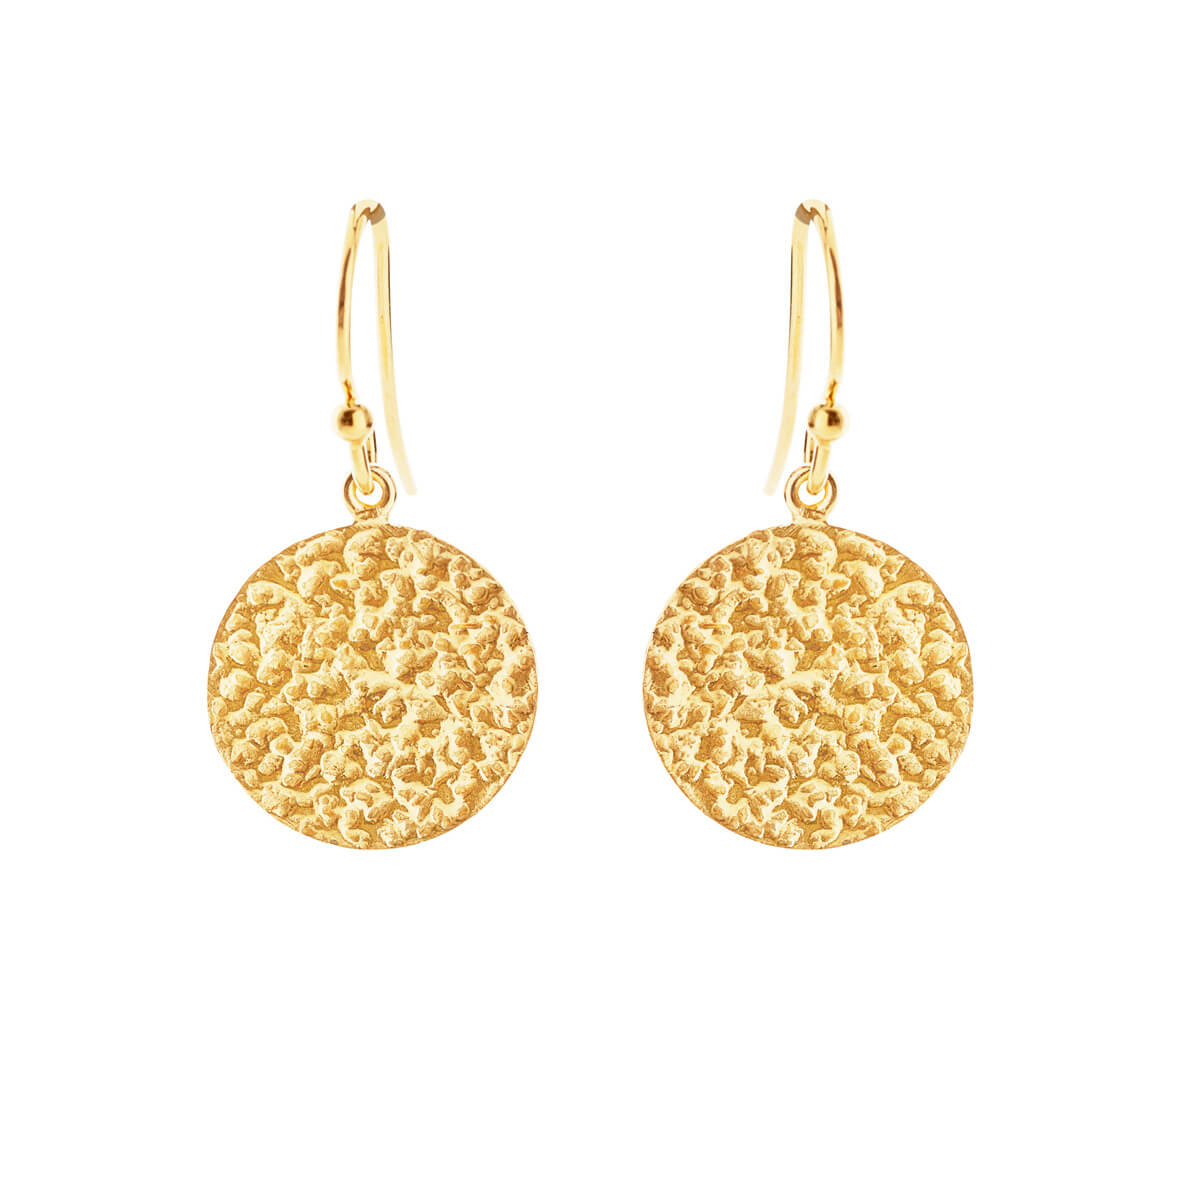 Earrings in gold plated silver - Susanne Friis Bjørner | Official Flagstore